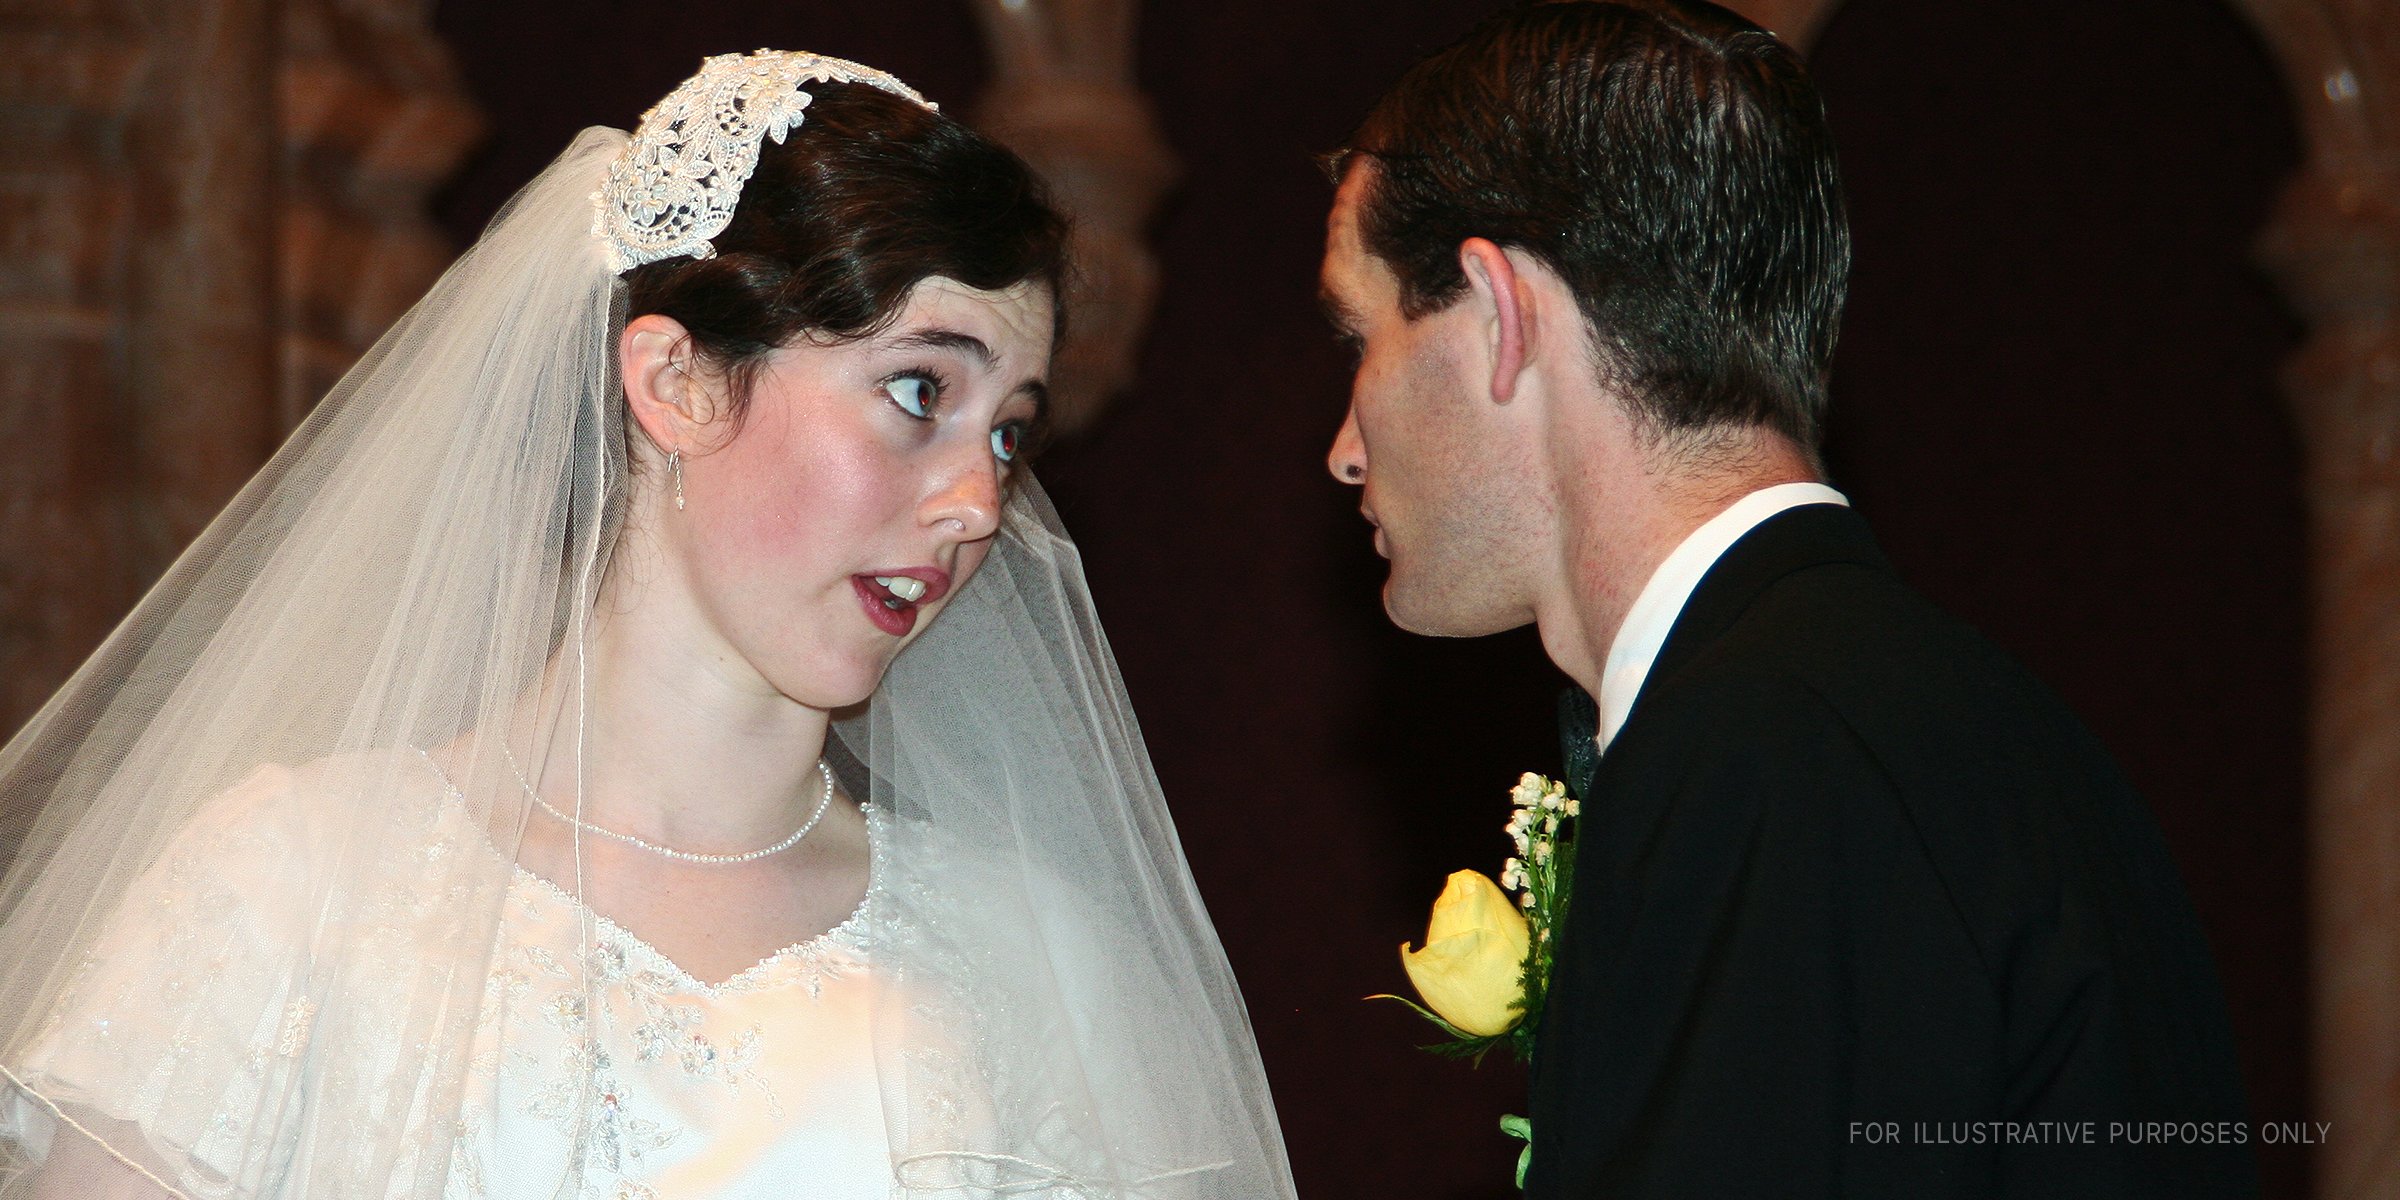 A bride and groom looking at each other | Source: Flickr/Sharon Mollerus (CC BY 2.0)